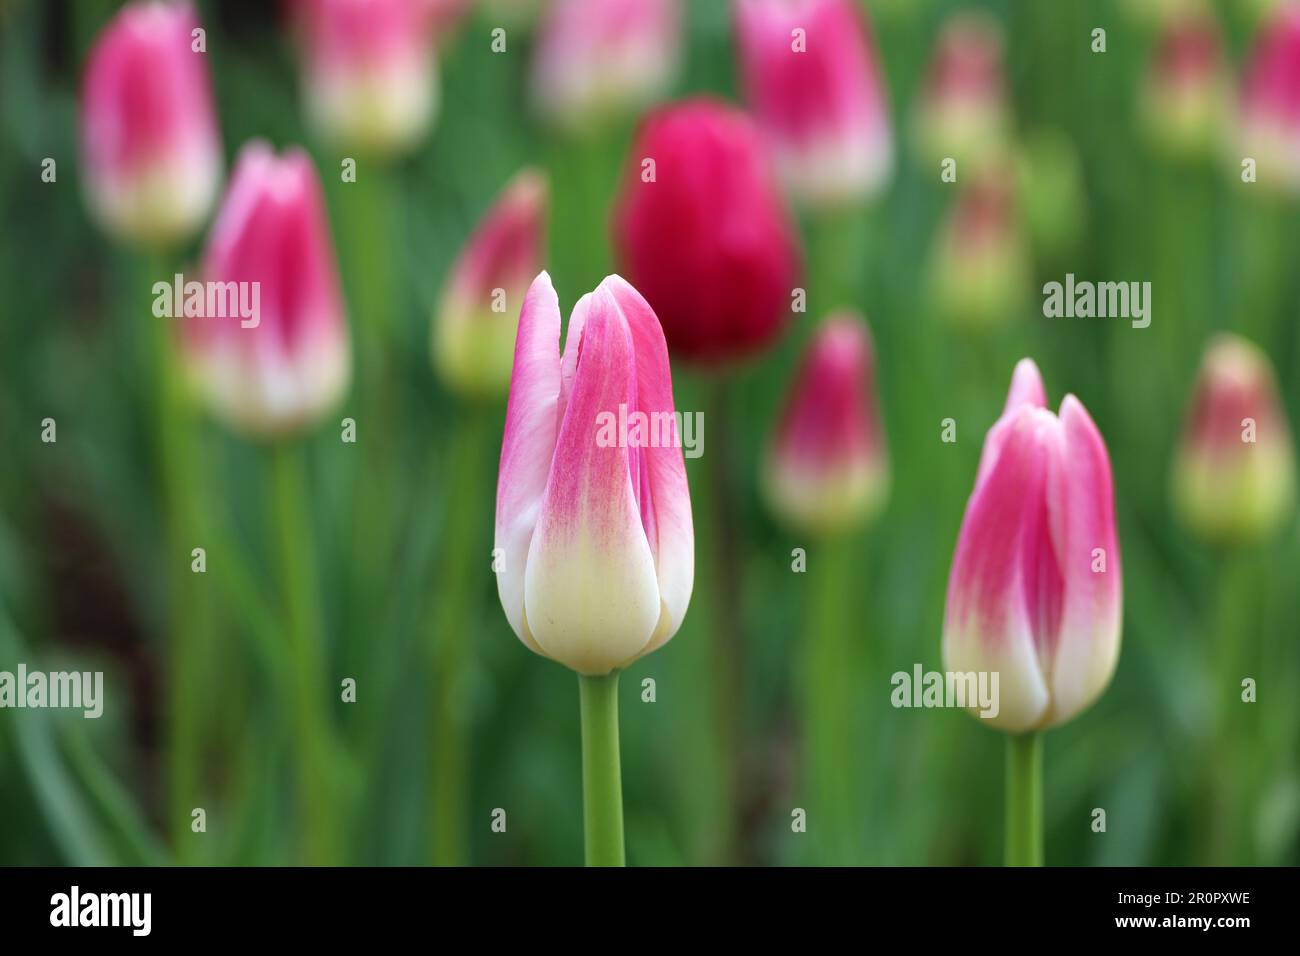 Pink tulip flowers, spring background. Field of blooming tulips, selective focus Stock Photo